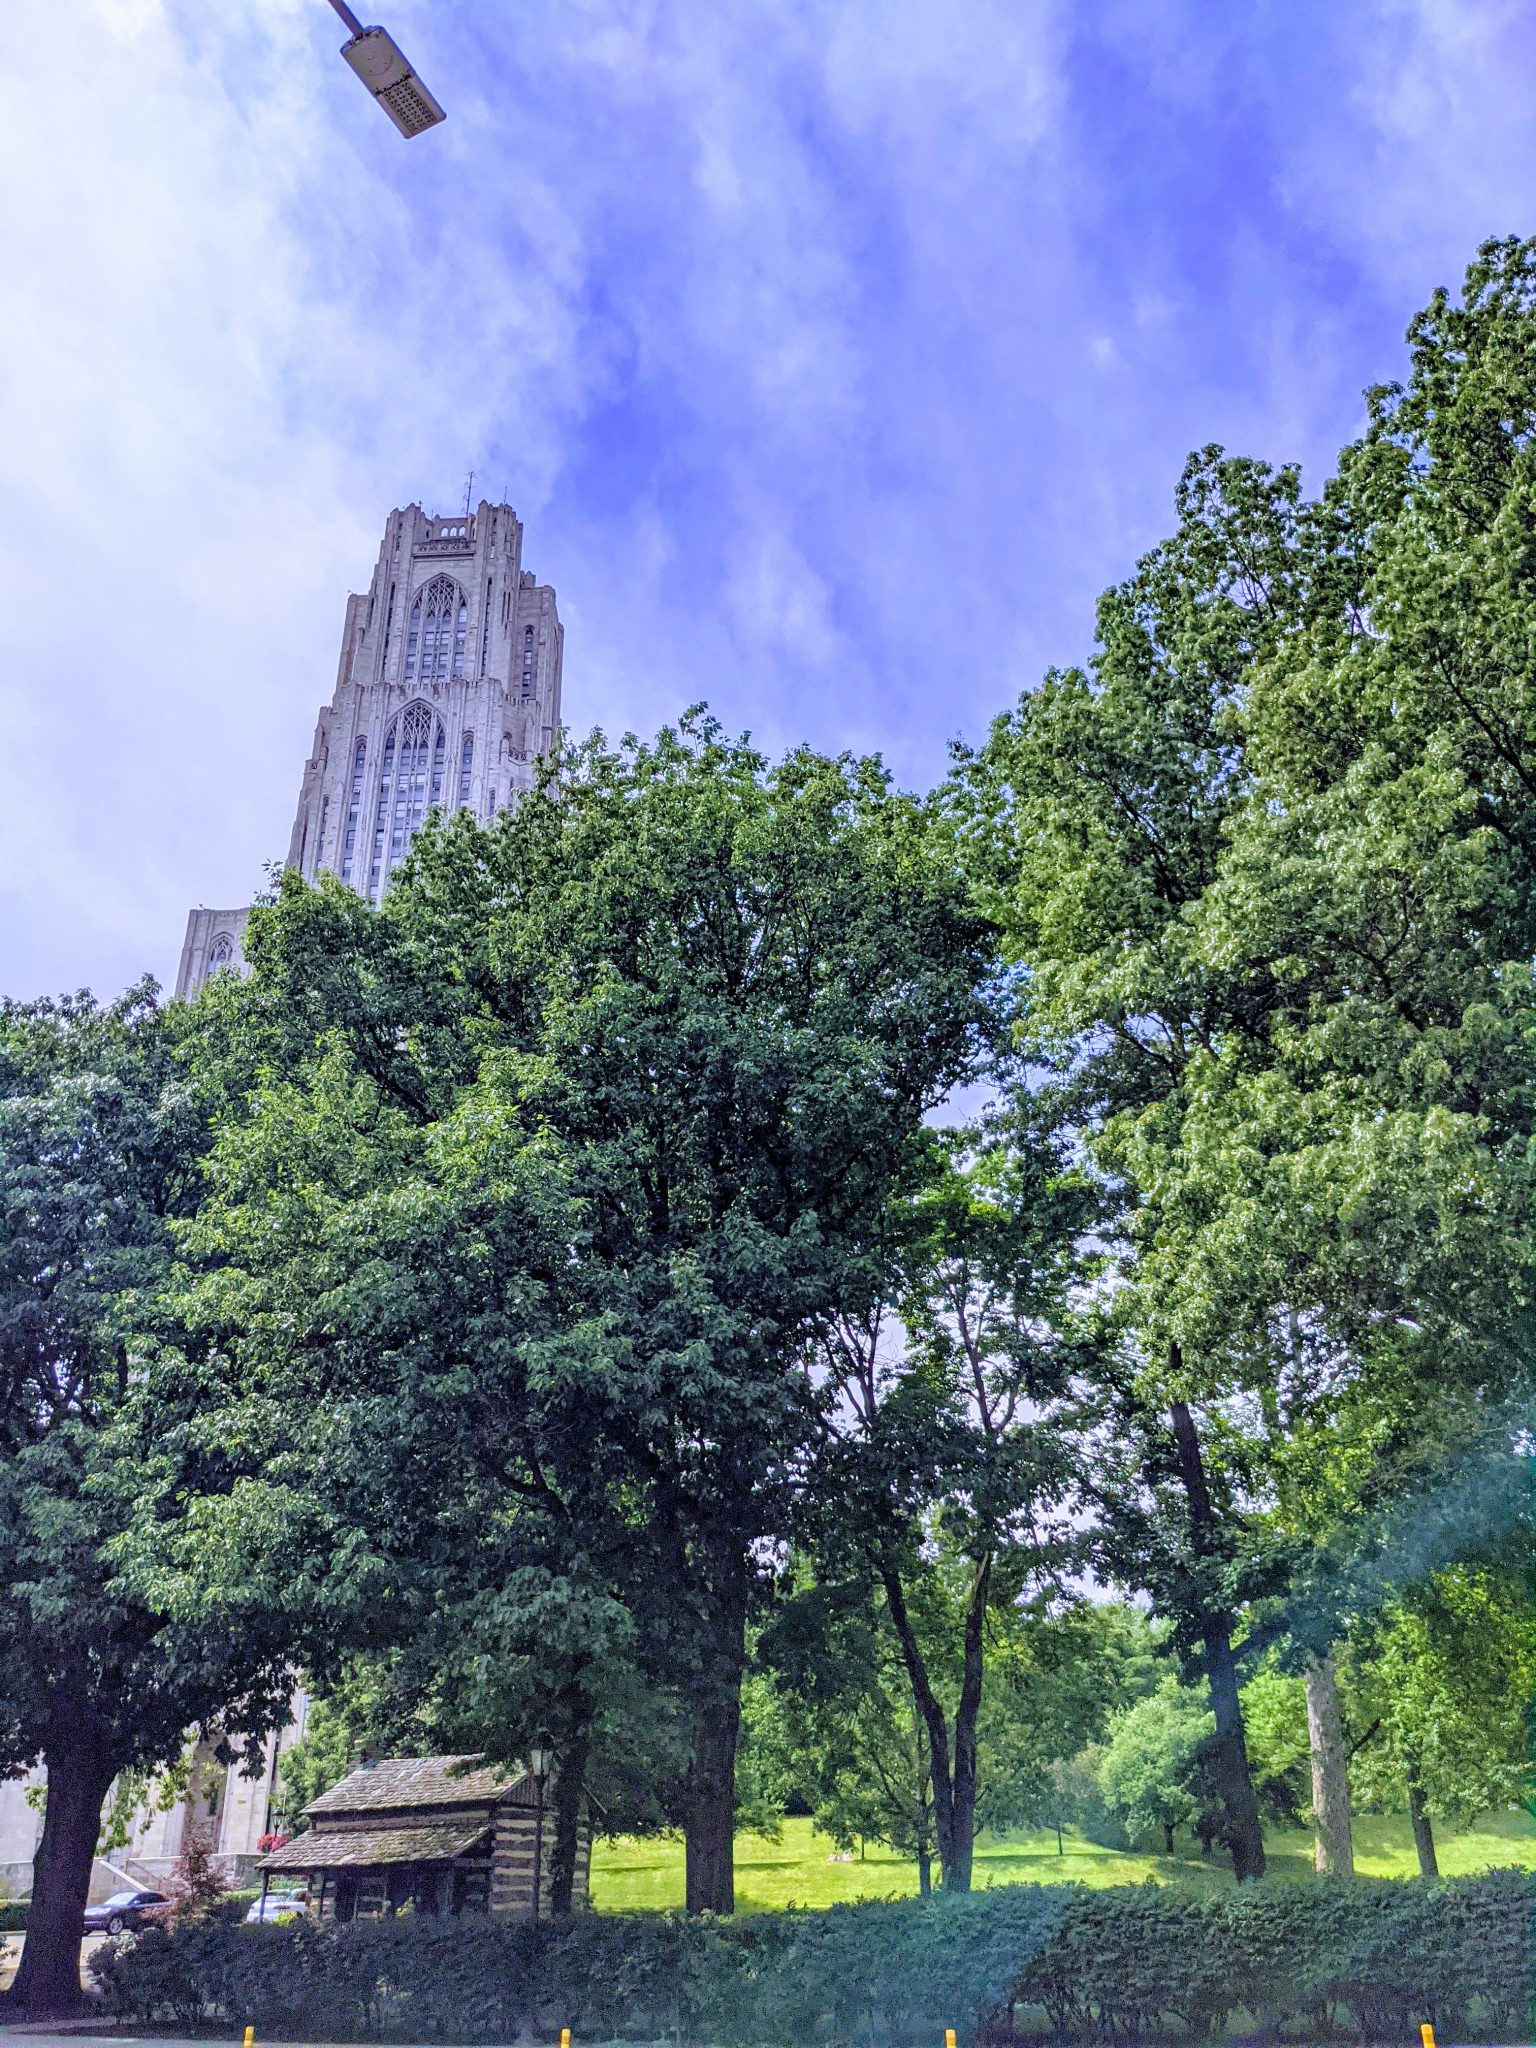 A tall gothic-style building, University of Pittsburgh's Cathedral of learning, partially obscured by trees.